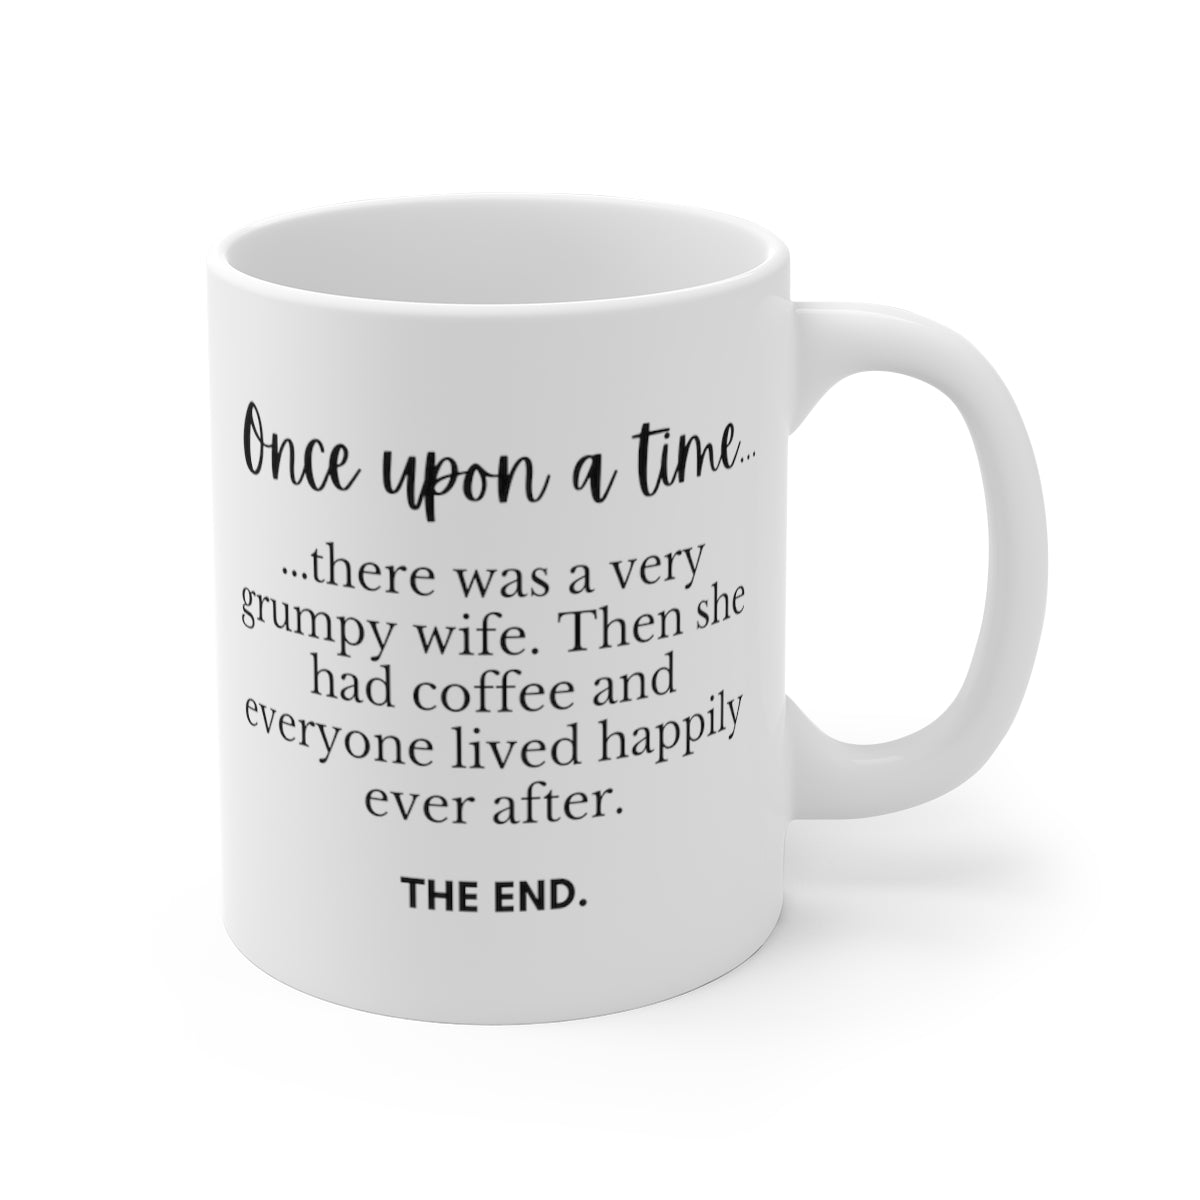 Once Upon A Time There Was A Very Grumpy Wife. Then She Had Coffee... | Funny Mug for Coffee Lovers | Mug 11oz